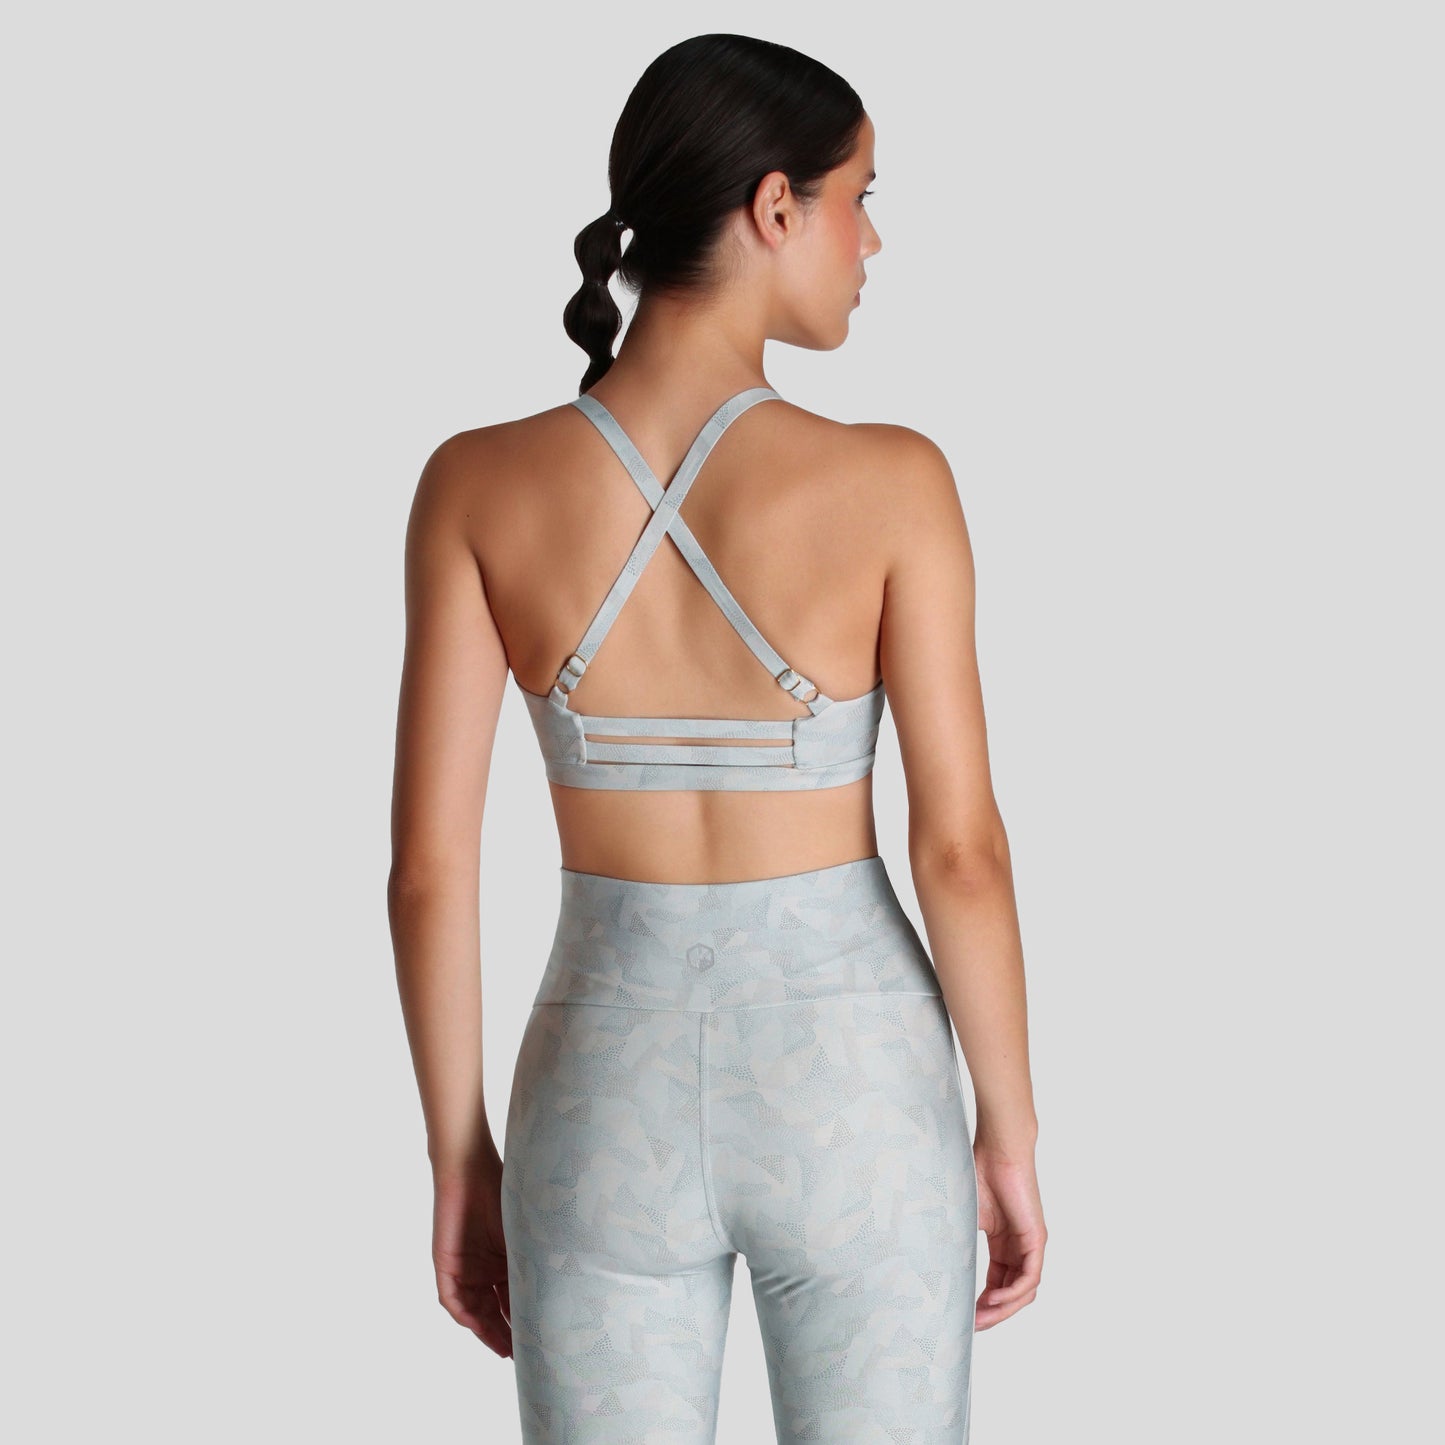 Printed TOP for exercising